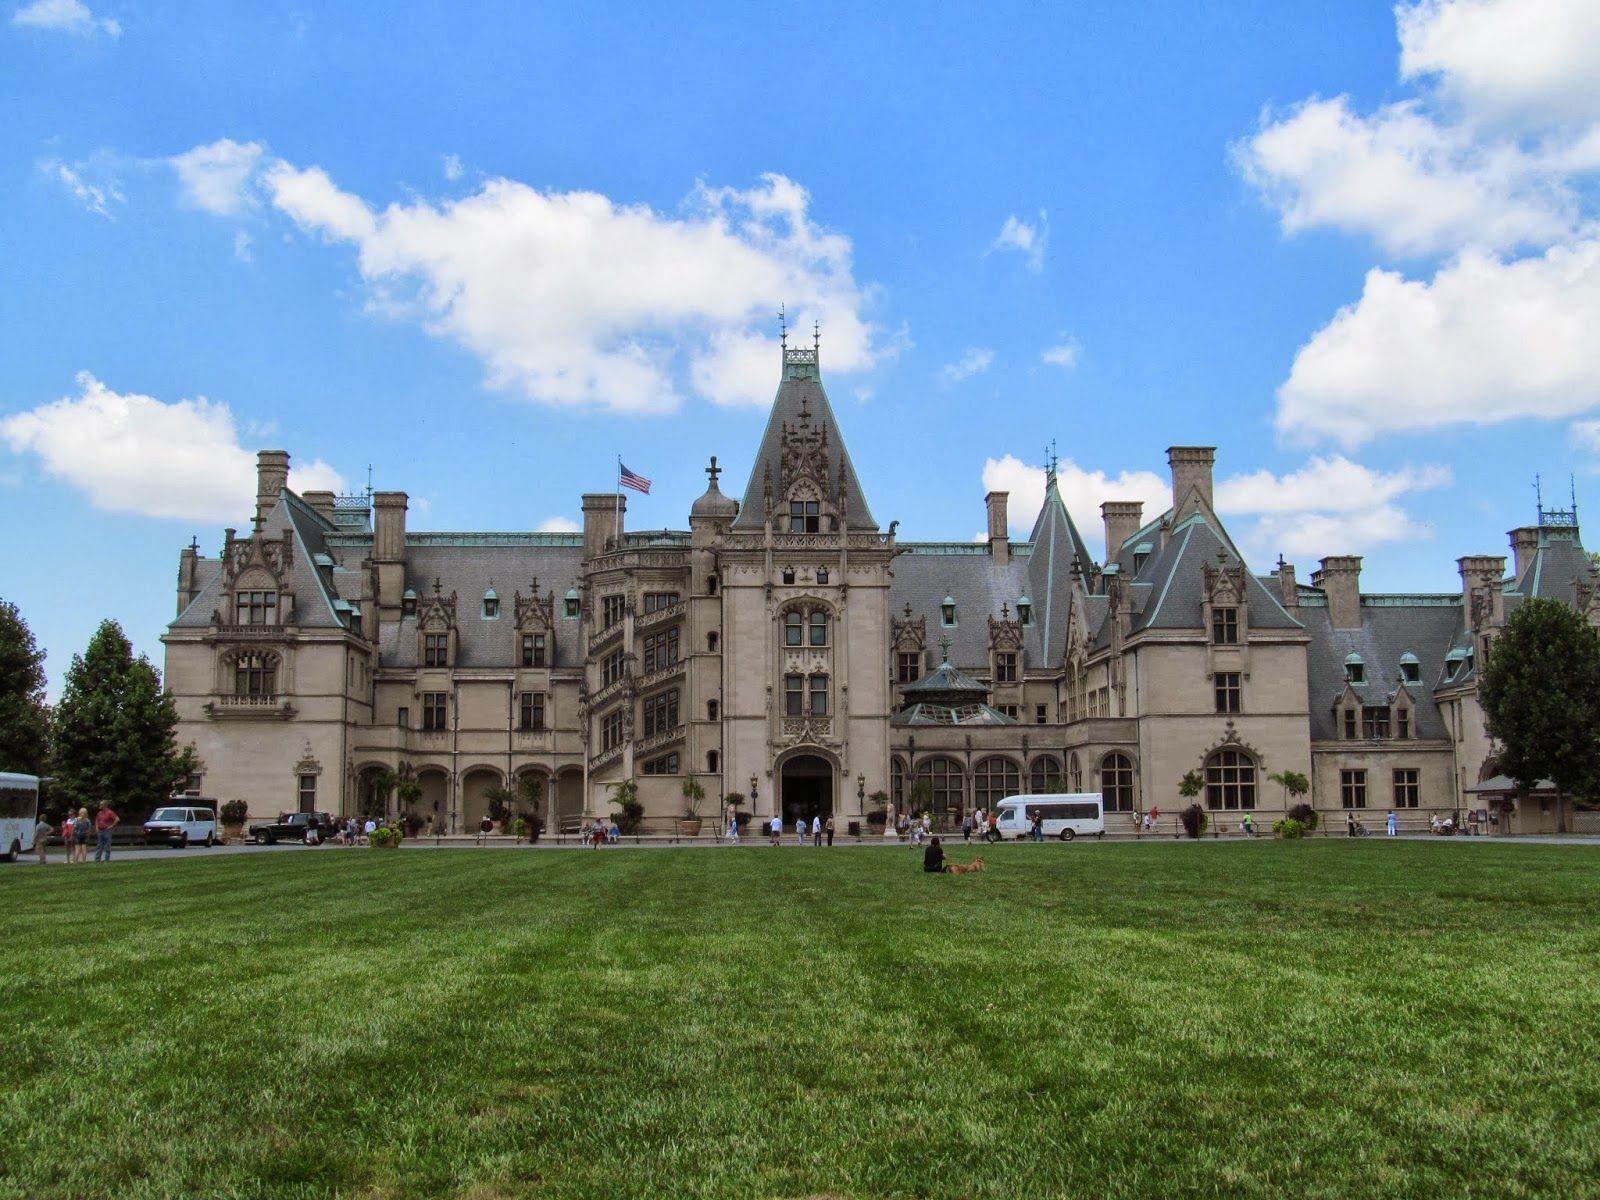 Our Outdoor Travels: Our Visit to the Biltmore Estates